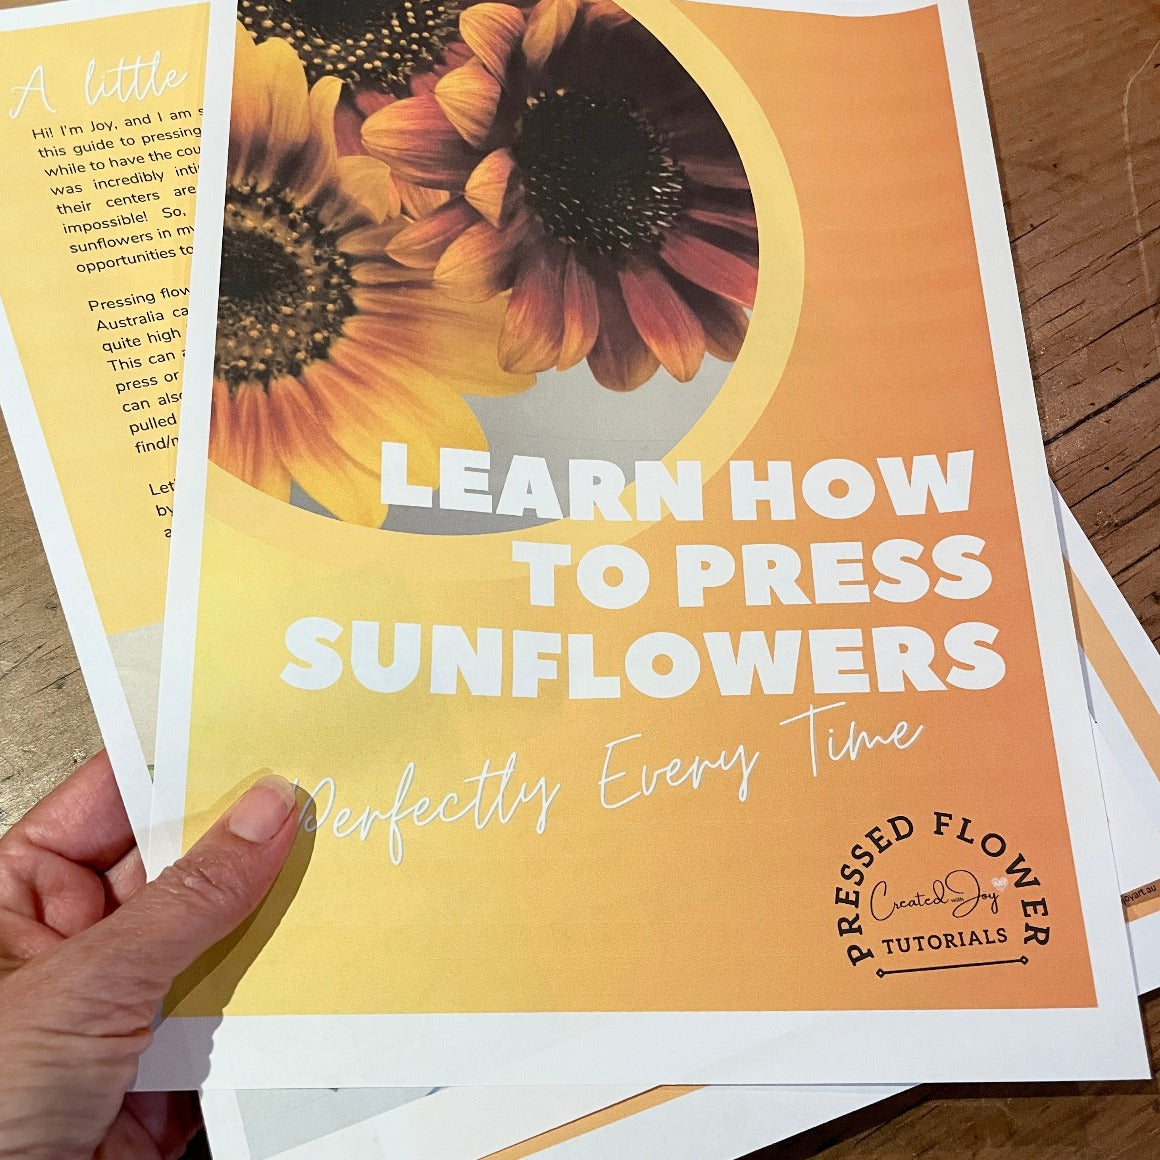 Learn how to press a sunflower whole